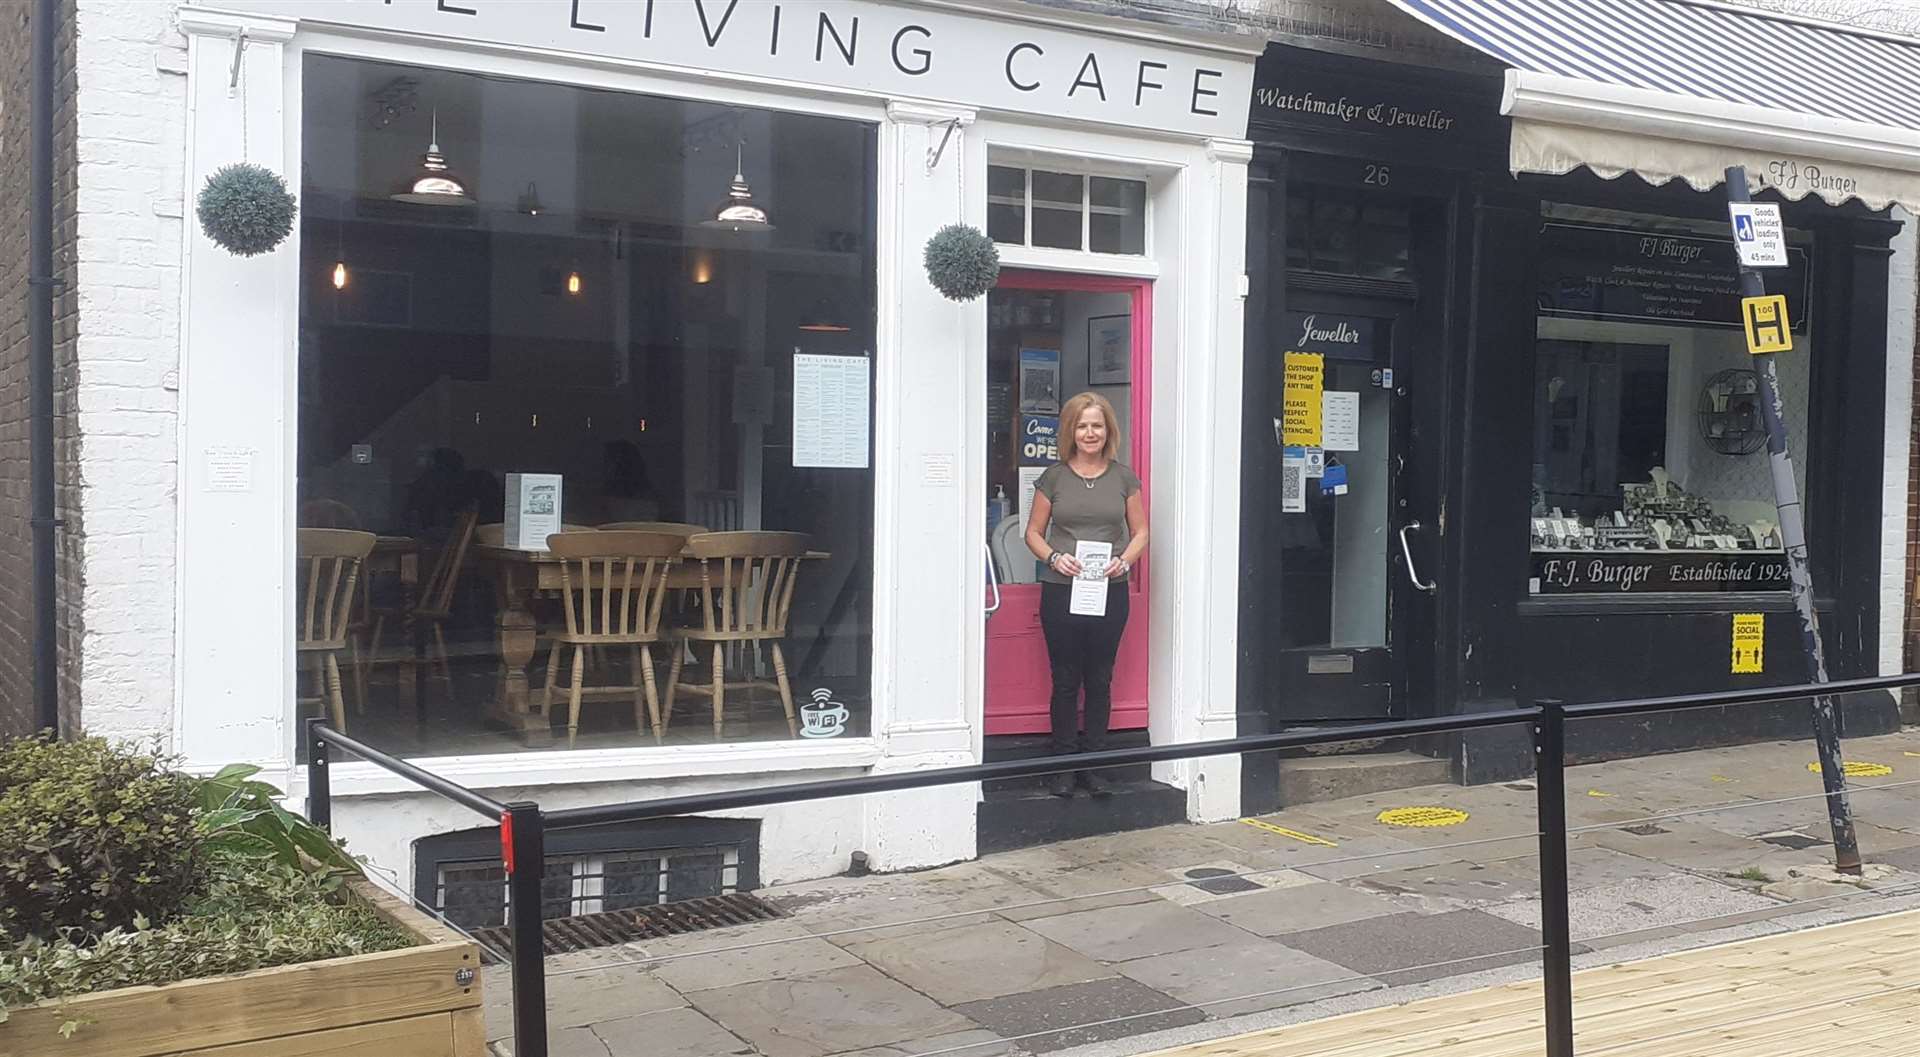 Marion Letham runs The Living Cafe with her husband Patrick